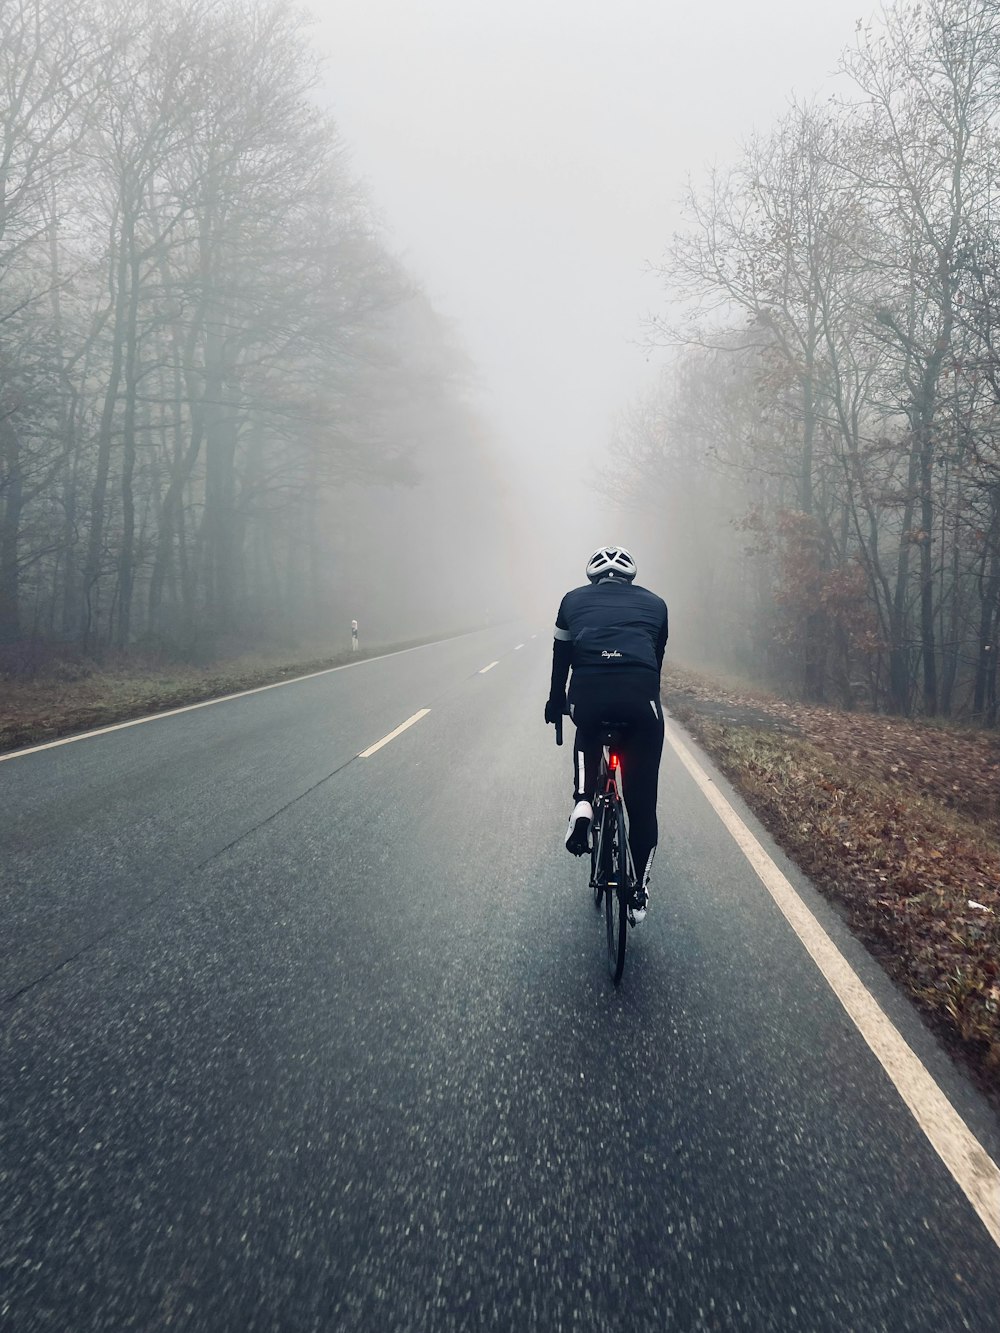 man in black jacket riding bicycle on road during foggy weather